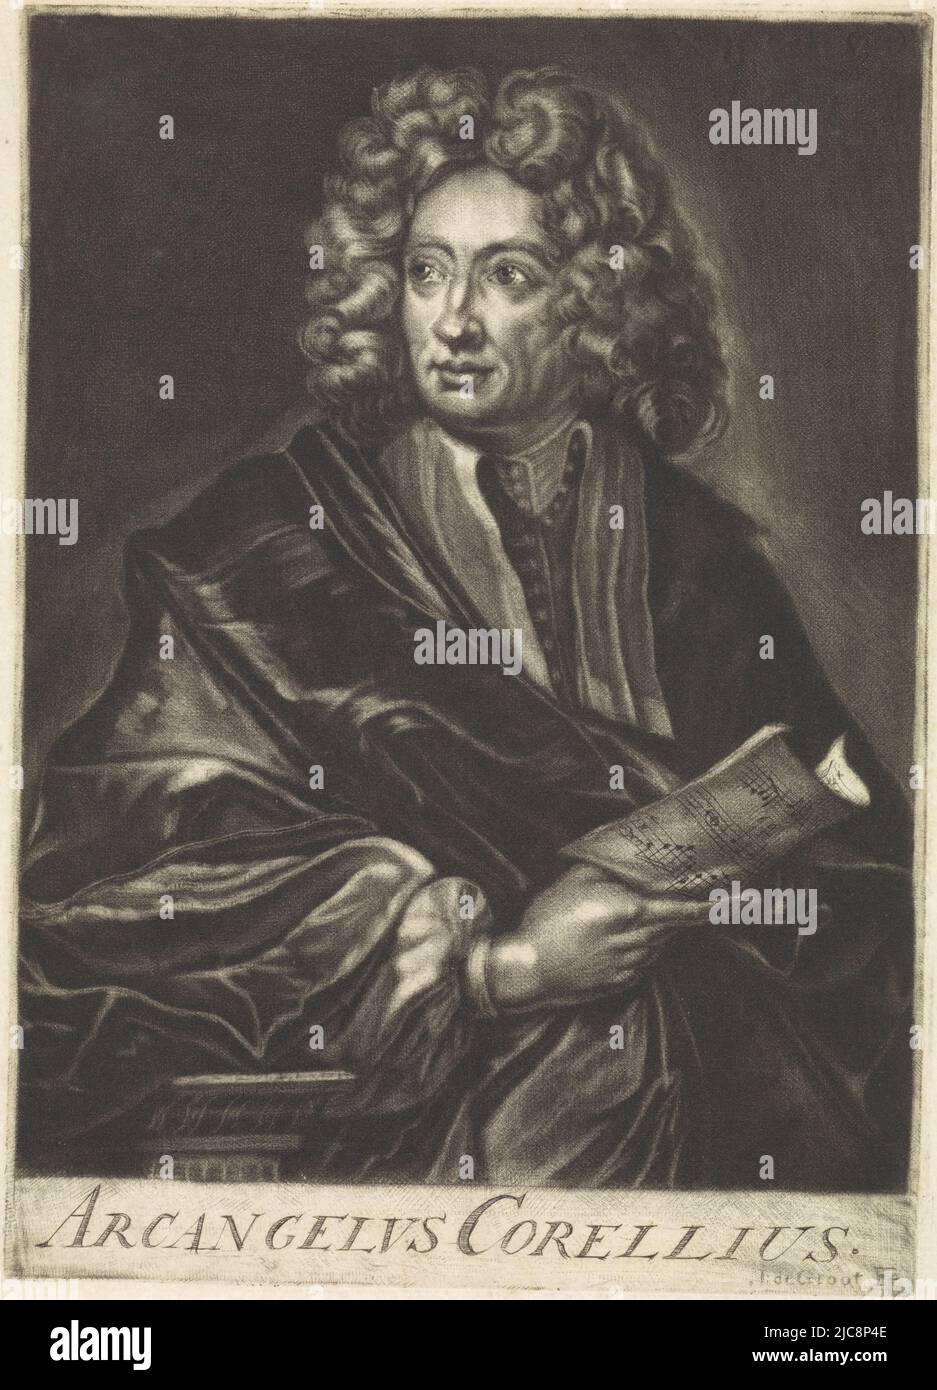 The Italian composer Arcangelo Corelli, with sheet music in his hand, Portrait of Arcangelo Corelli, print maker: Johannes de Groot (II), (mentioned on object), Northern Netherlands, 1698 - 1776, paper, engraving, h 243 mm × w 174 mm Stock Photo